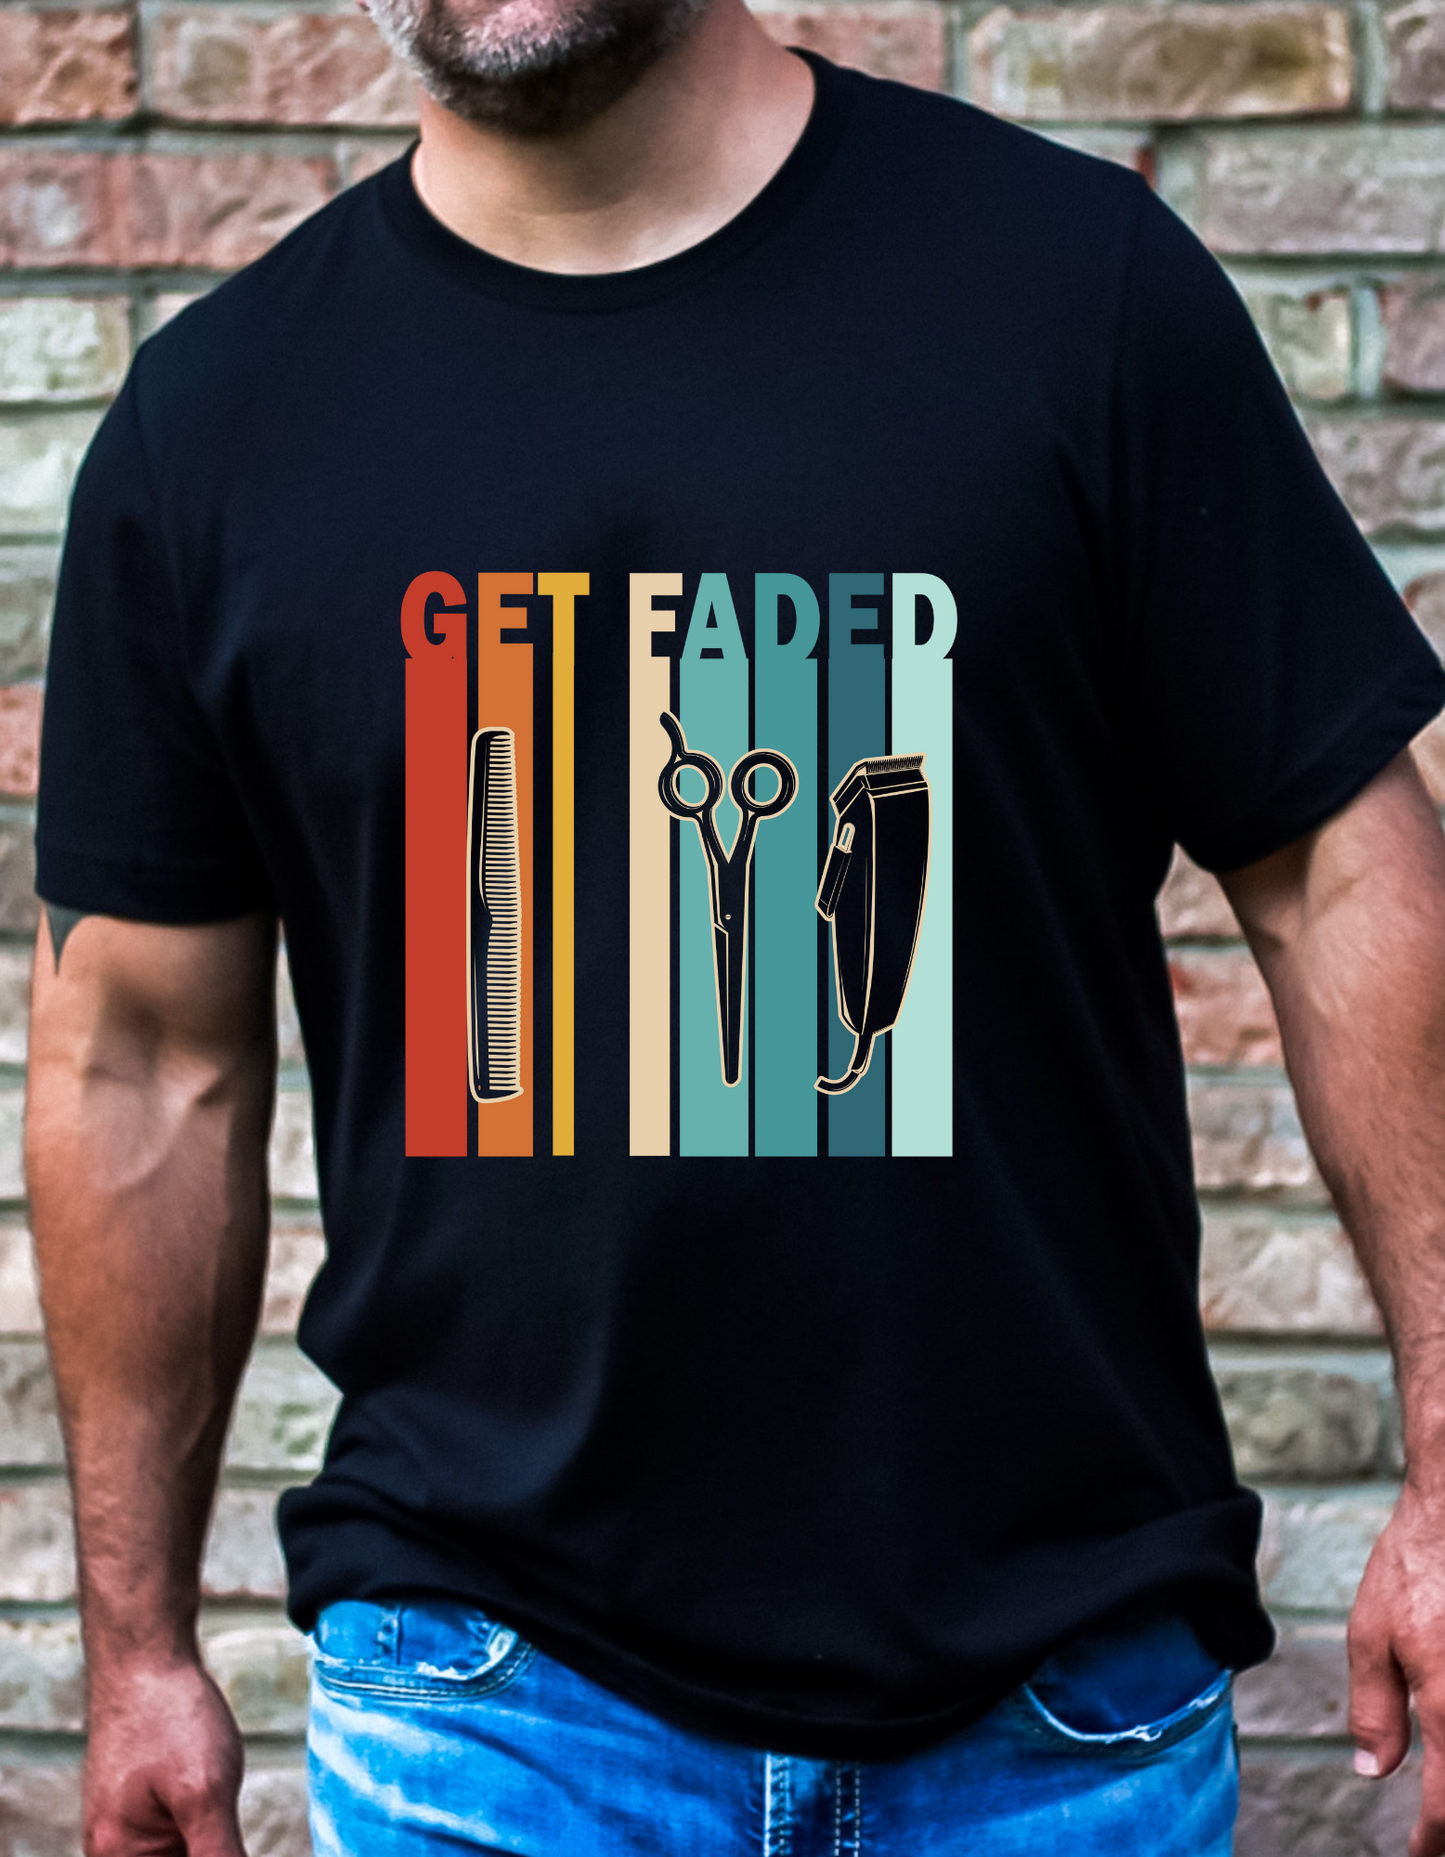 Get Faded T-shirt